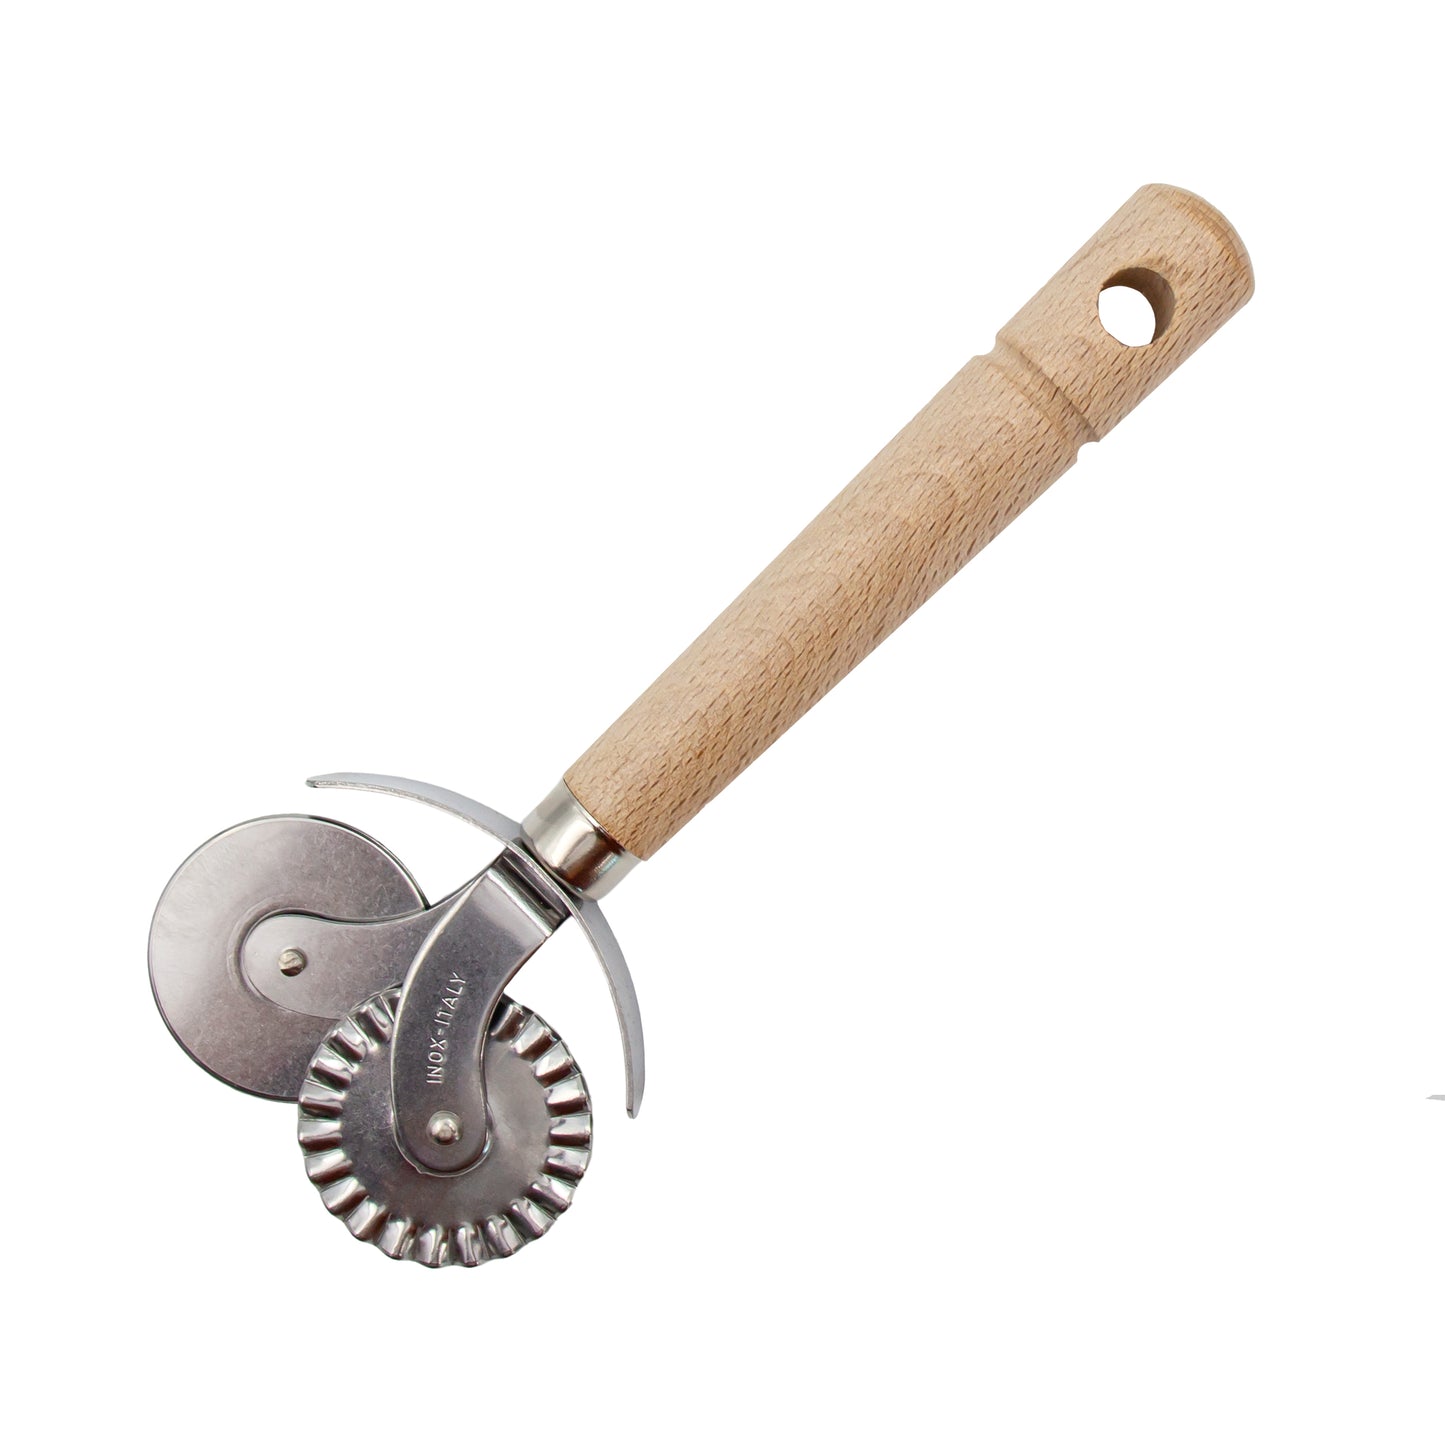 Italian Made double wheel pasta cutter with wooden handle